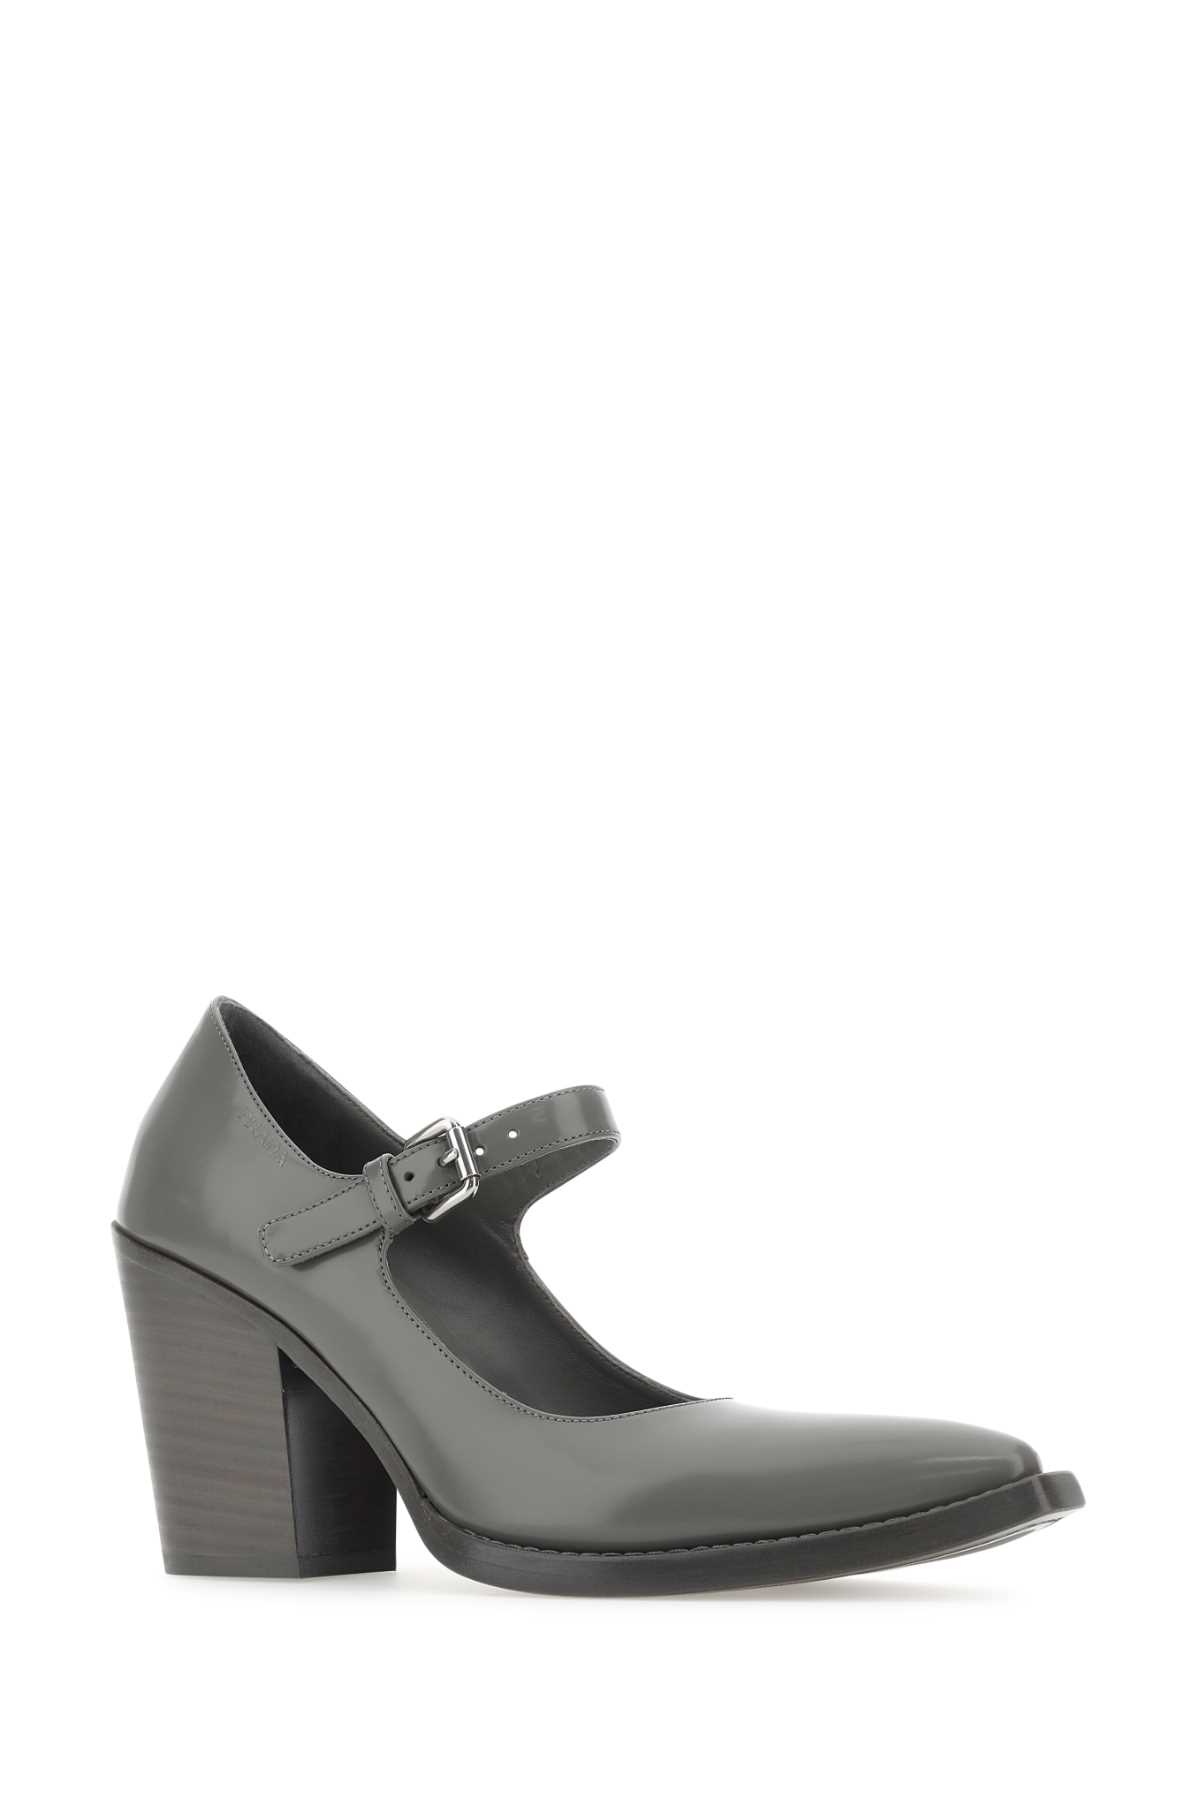 Prada Grey Leather Pumps In Gray